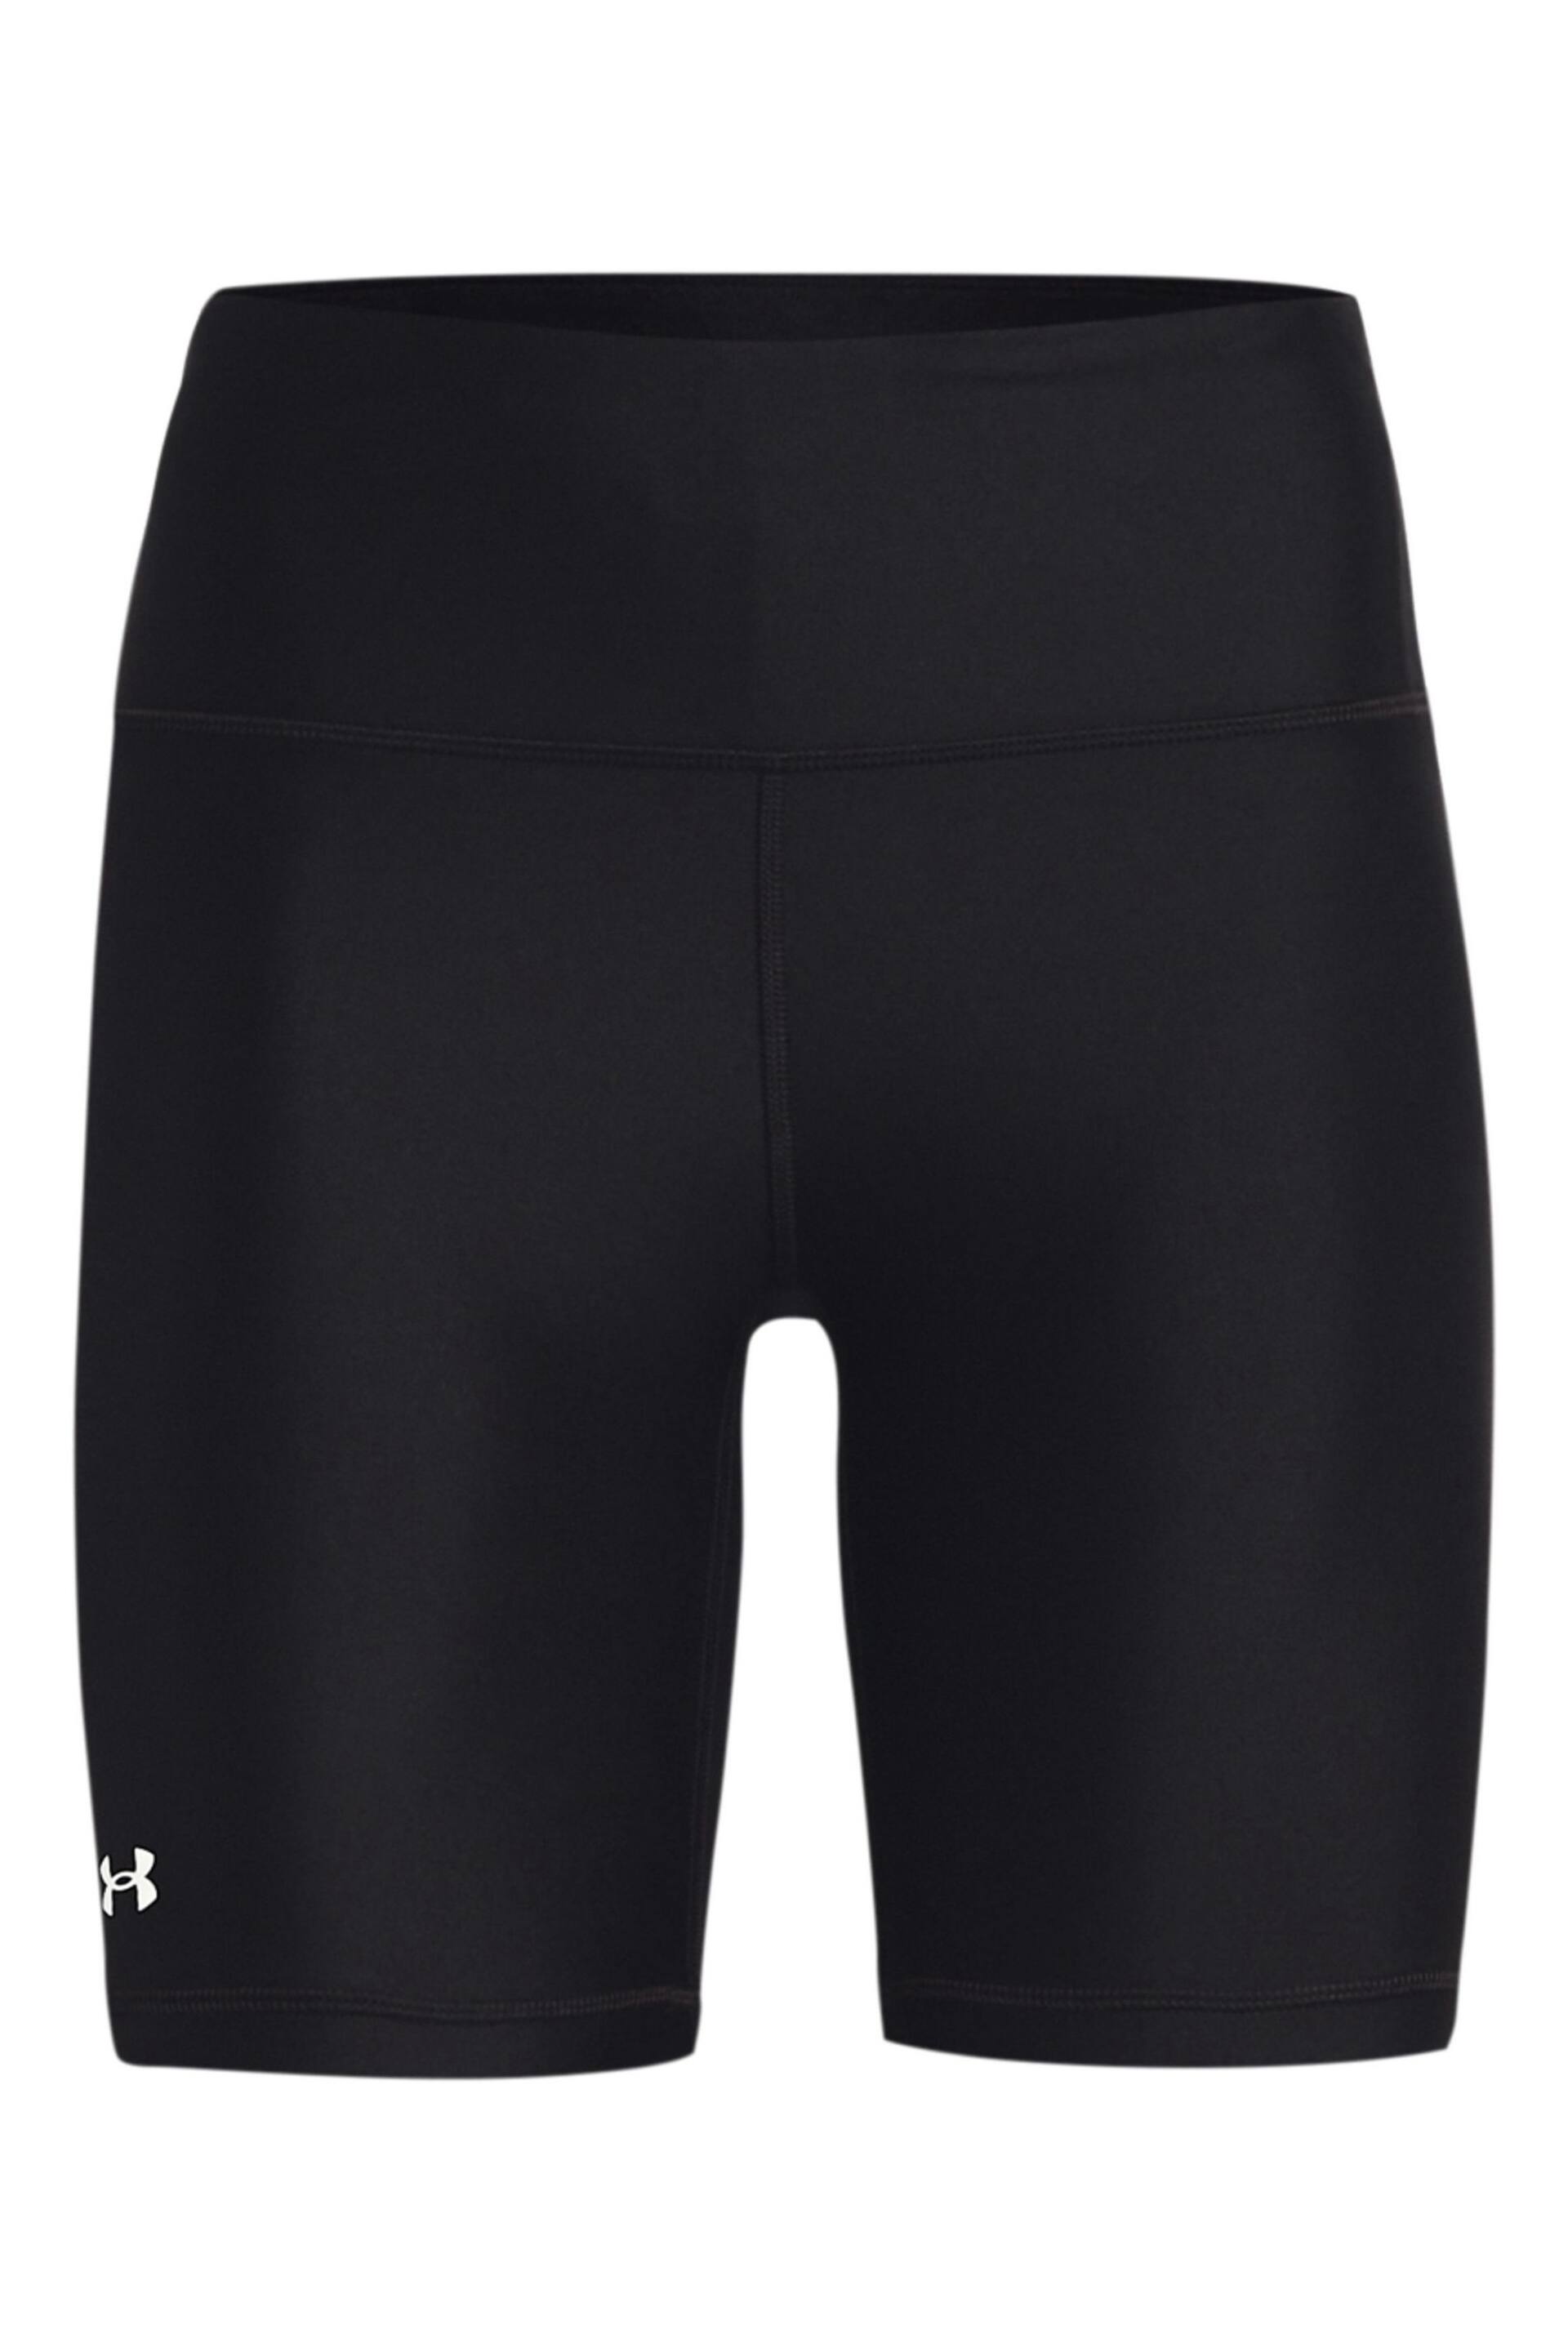 Under Armour HG Armour Cycling Shorts - Image 4 of 5